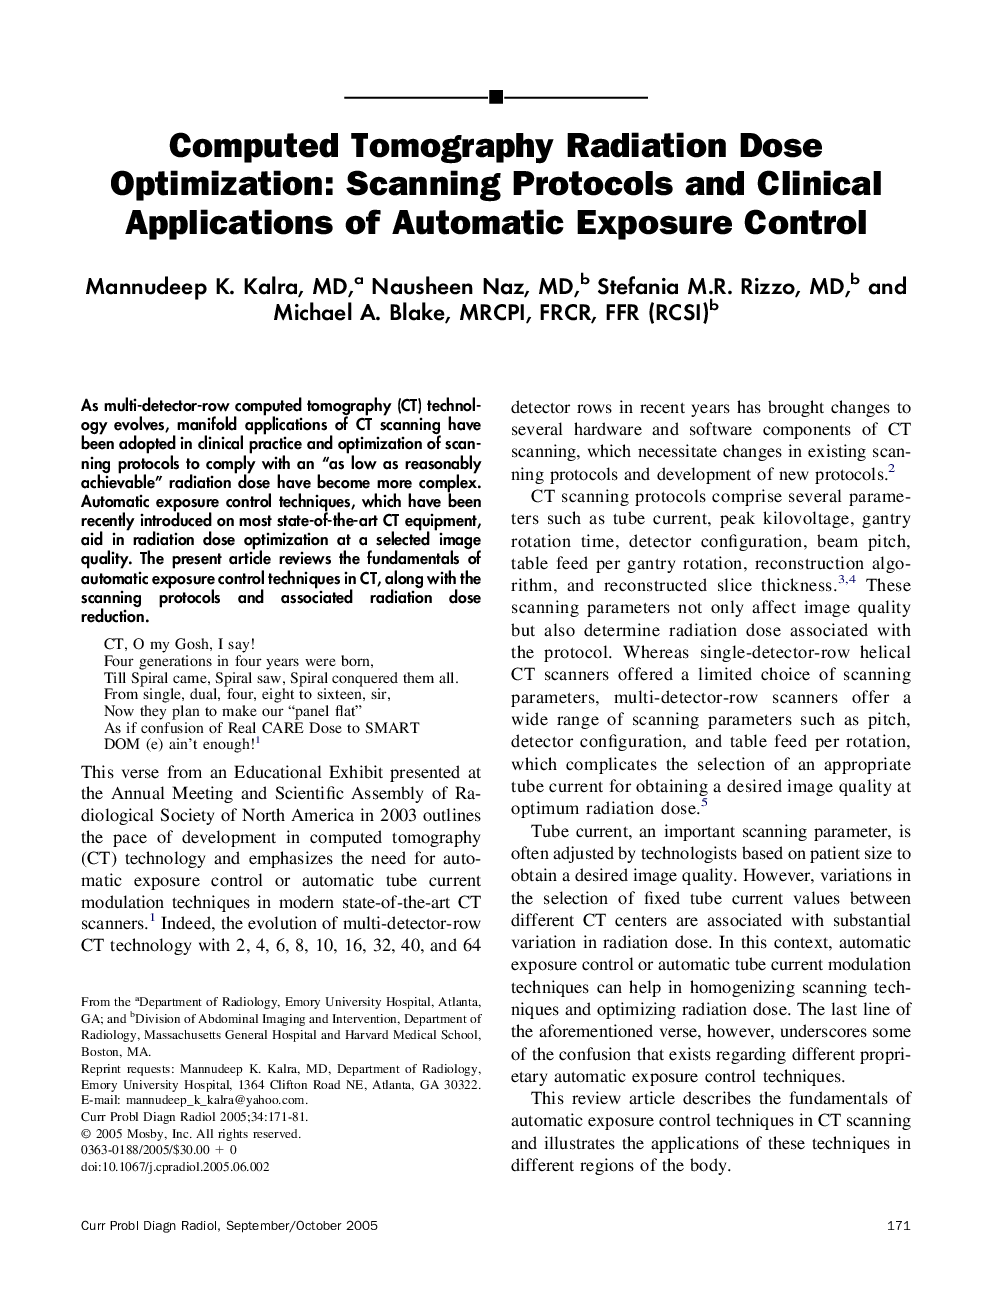 Computed Tomography Radiation Dose Optimization: Scanning Protocols and Clinical Applications of Automatic Exposure Control